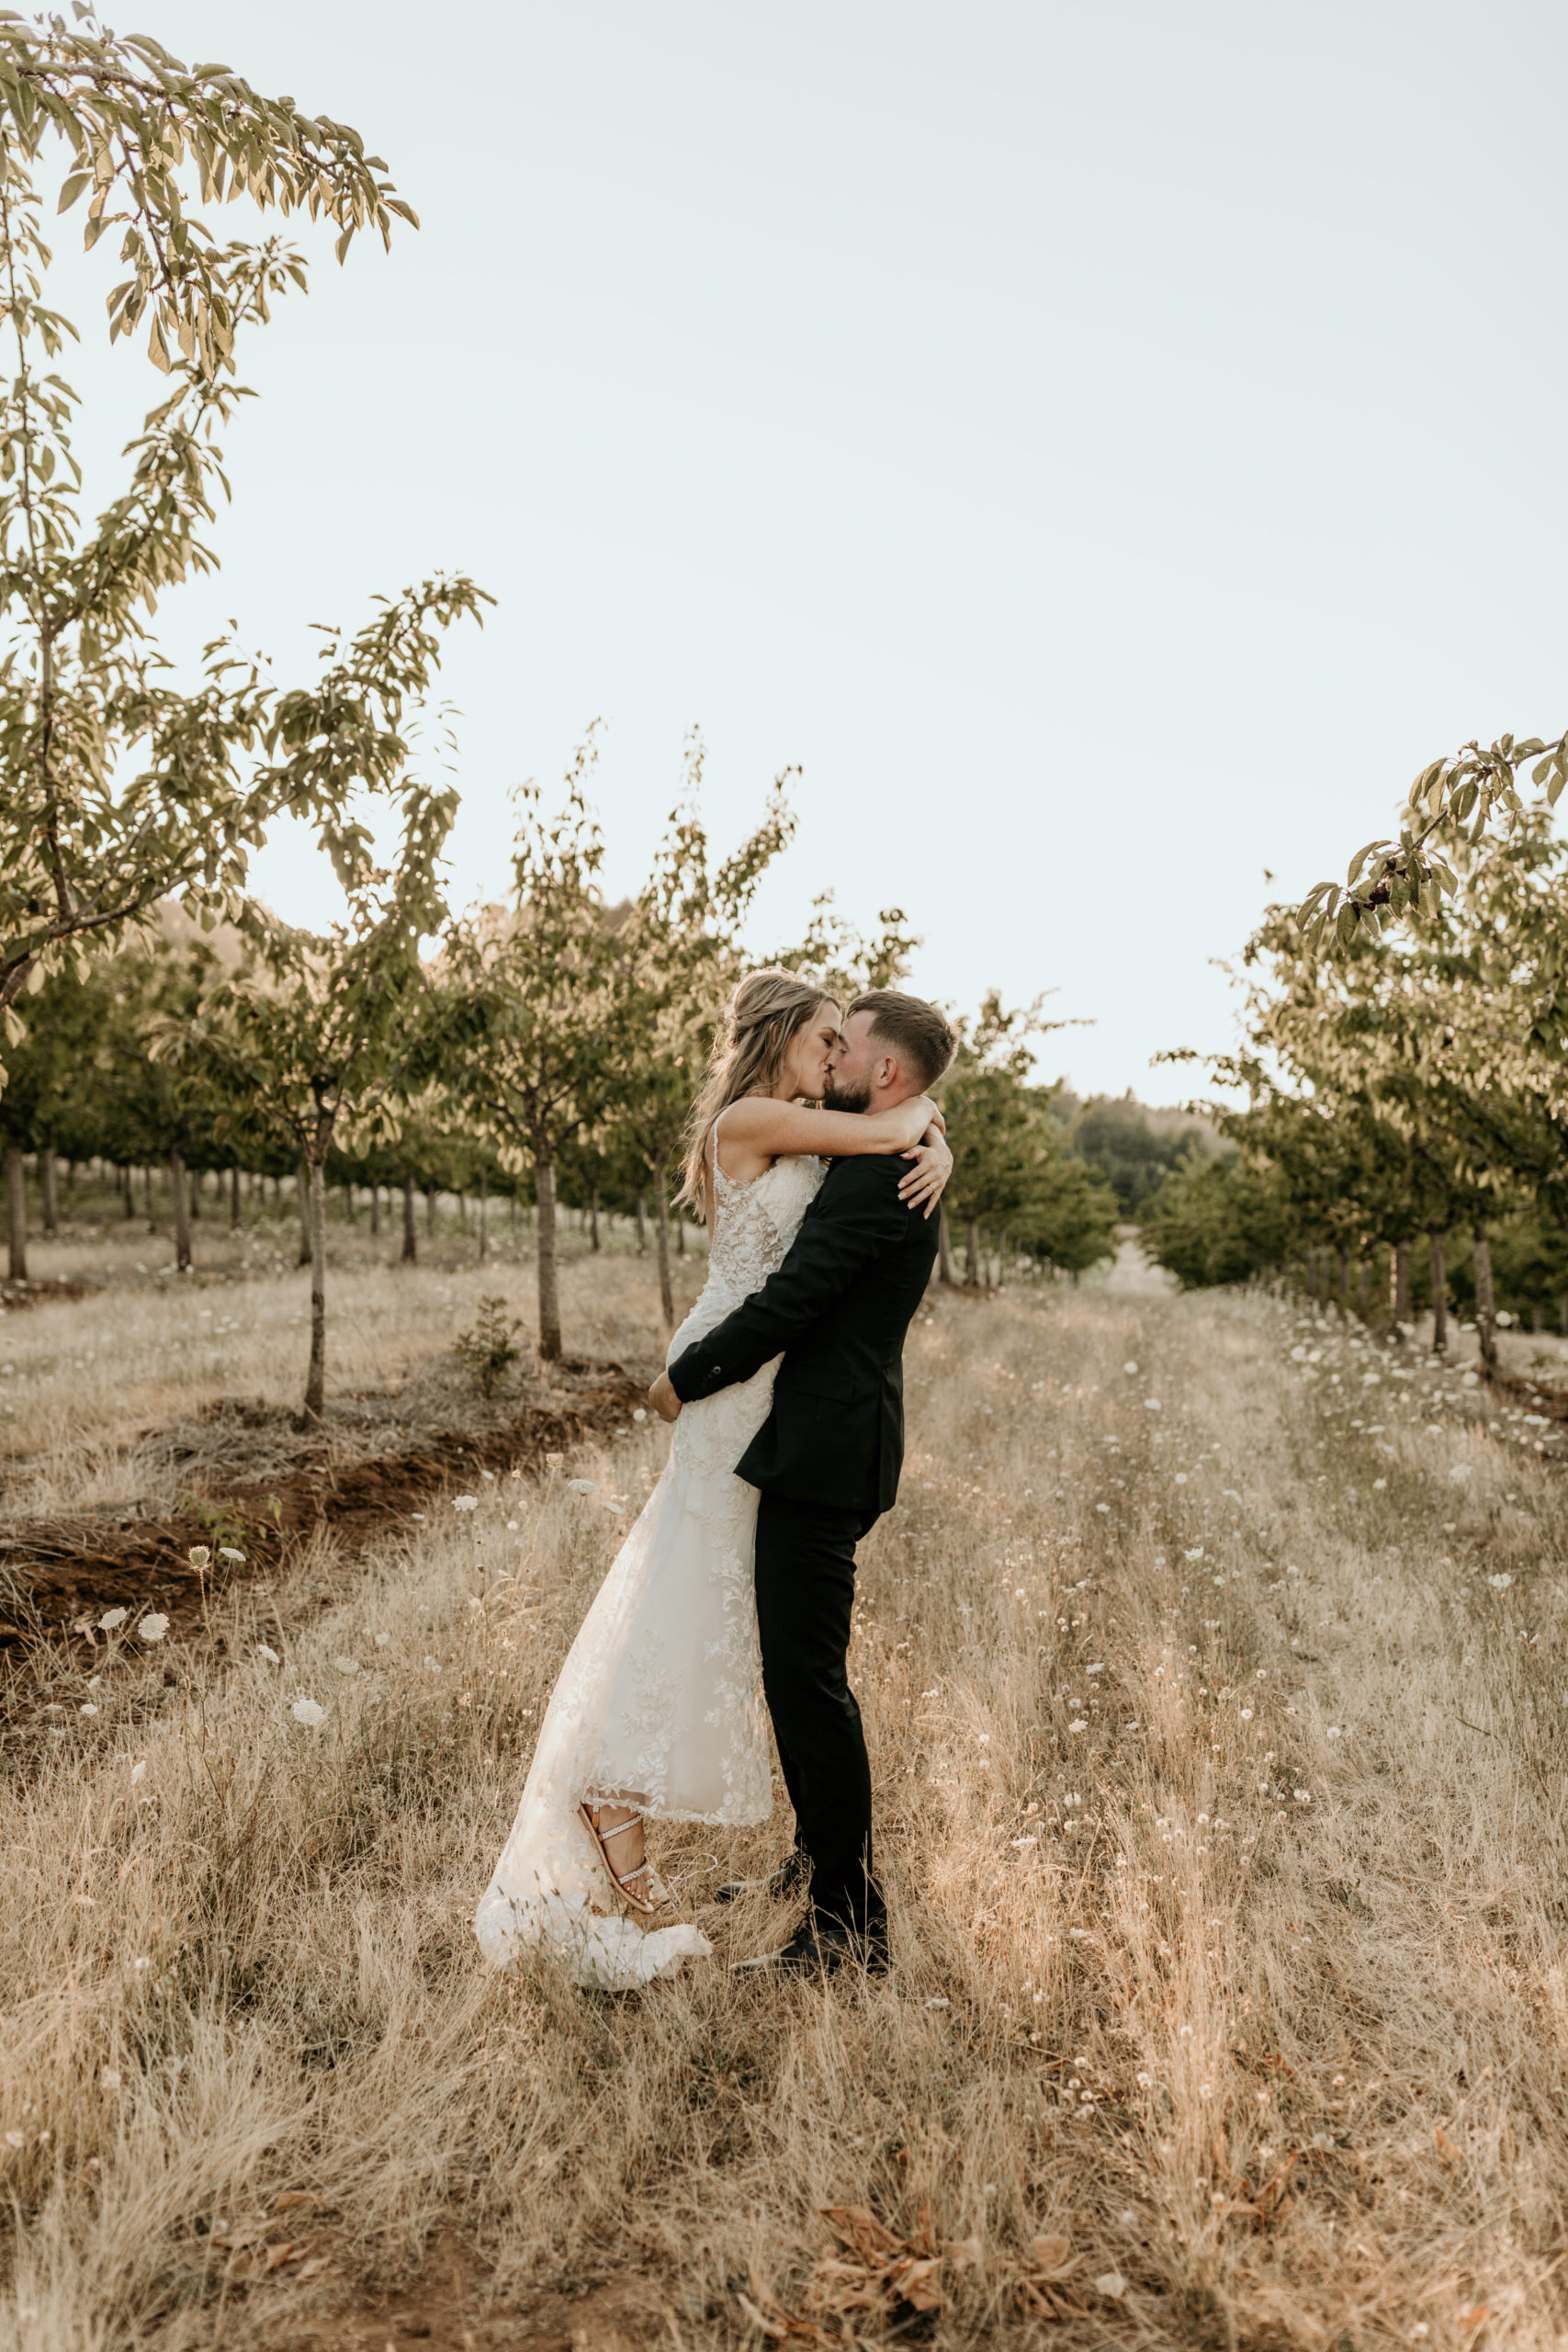 Groom carries bride up as they share a kiss during their Oregon Badlands wilderness elopement, captured by Morgan Wirth Photography